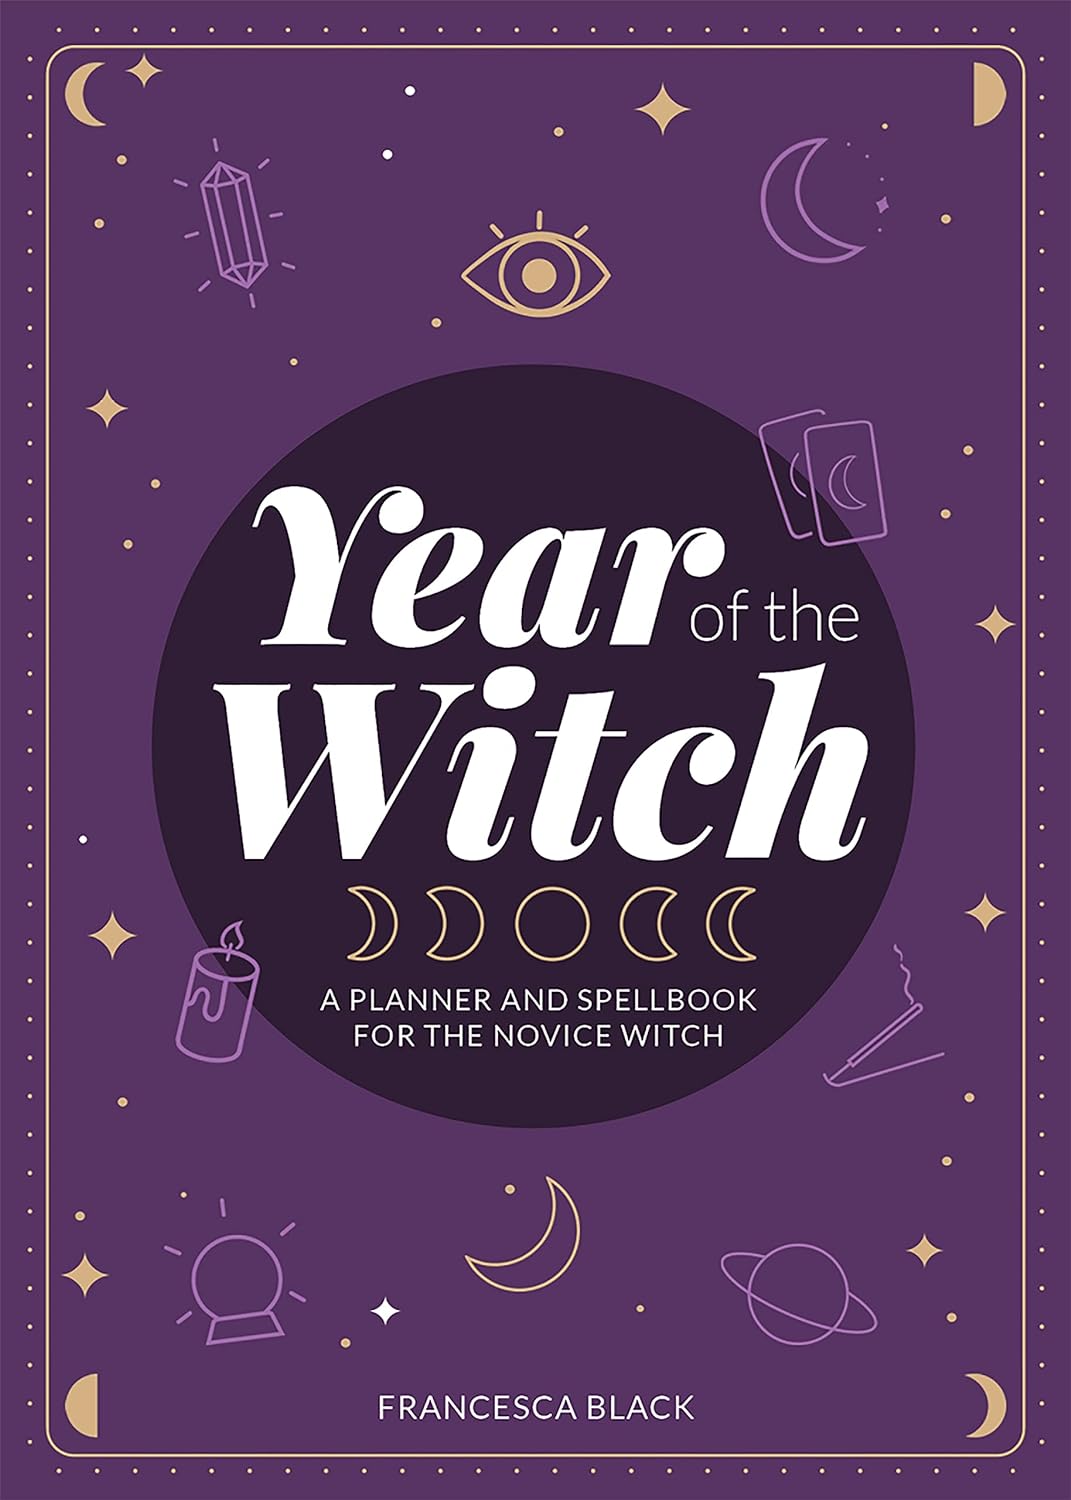 Year of The Witch